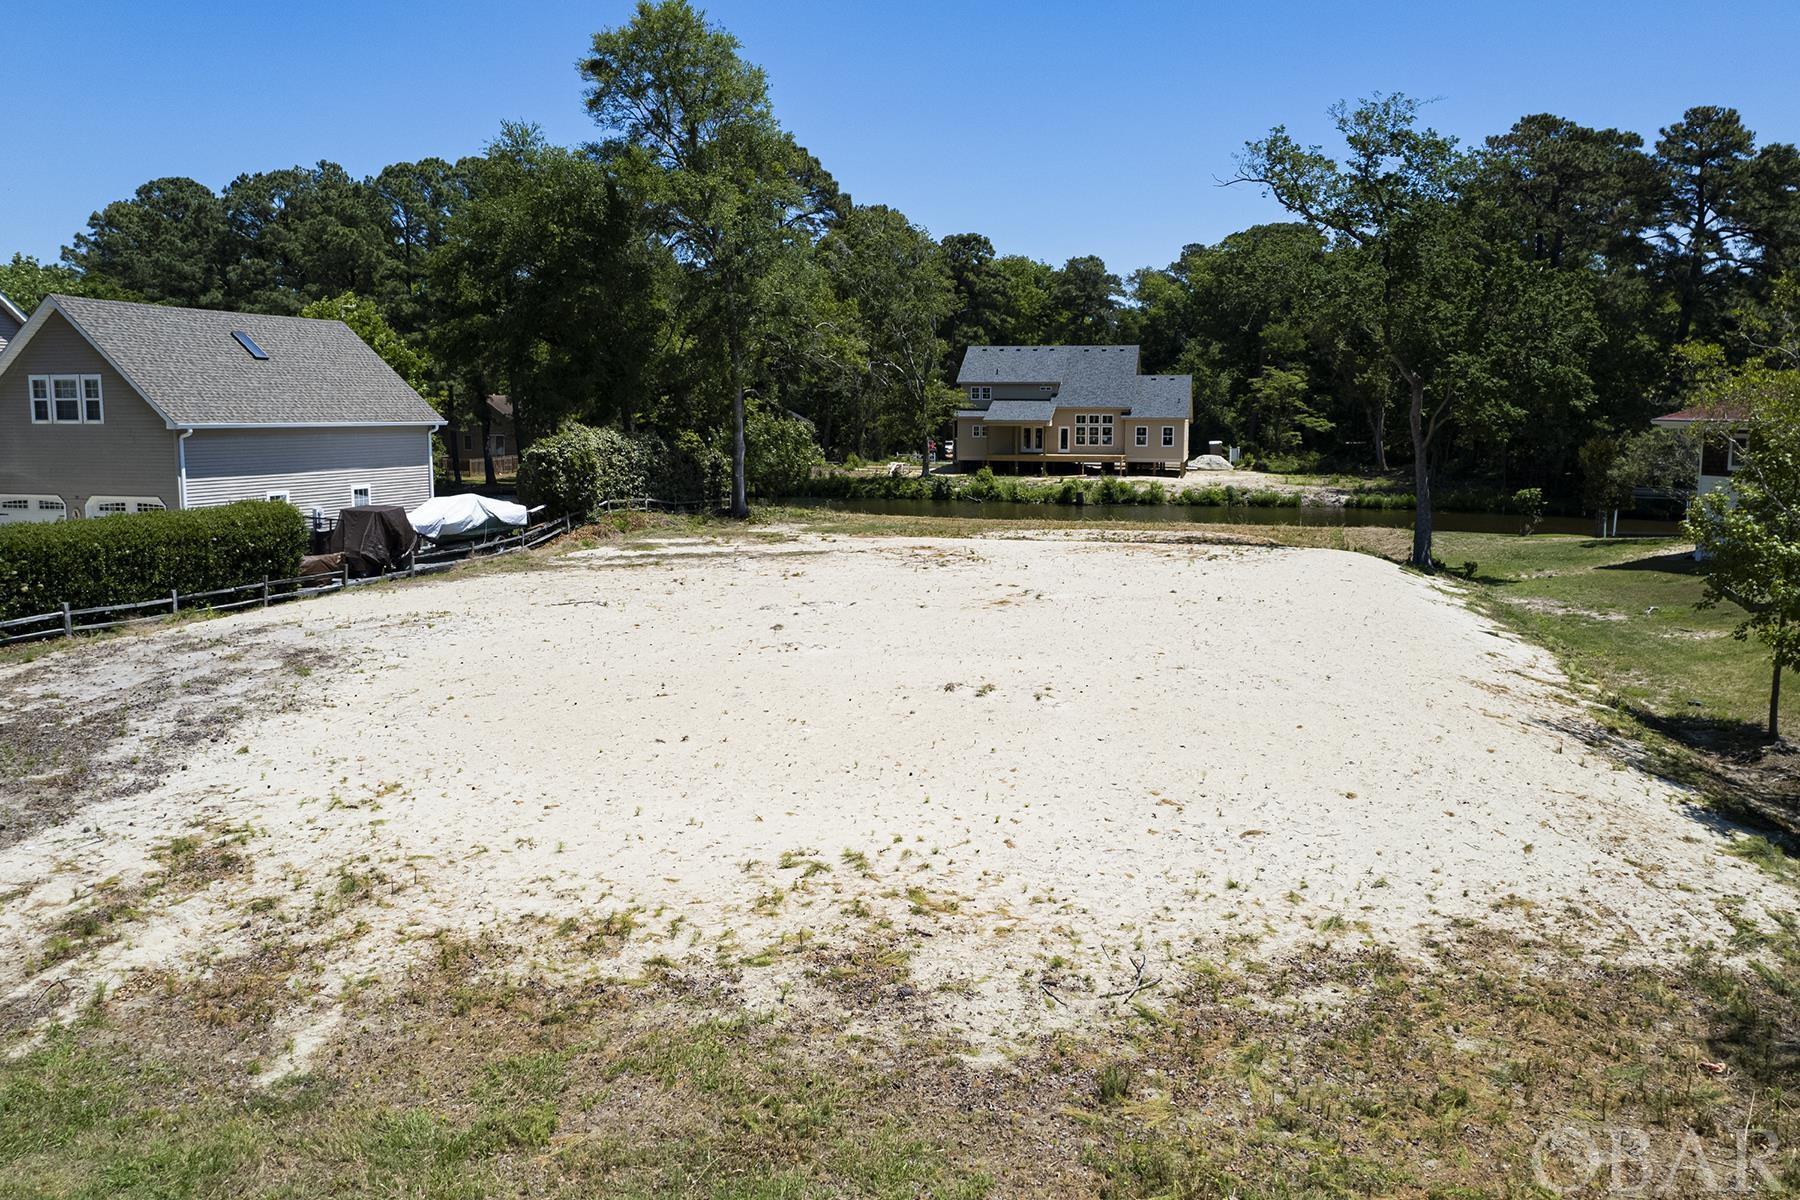 UNIQUE OPPORTUNITY of READY-TO-BUILD canalfront, bulkheaded land in Southern Shores. Build your dream Outer Banks home on almost half an acre, where ALL THE SITE WORK HAS ALREADY BEEN DONE for you. The owner has cleared the land, paid the water tap fee, completed a site plan, gotten a septic permit, had the land filled to the max at the time, and the building pad is level and ready to go! That's right, over $50,000 in site work has already been done for you, which saves you money AND TIME. Four bedroom septic permit on file. Owner filled the land to 7' above base flood elevation, the max at the time it was filled. Since then, the code has changed and another 1' could potentially be added (assuming the slope on each side meets the code.) The owner just had it bush hogged again, to clear any overgrowth. The owners planned to build their forever home on this land, which is why all the work has been done with precision. Sometimes life has other plans, and the owners have decided to change gears and let the land go. This lot is located in the town of Southern Shores, in a neighborhood that fronts a golf course on one side of the street, and a canal on the other. It's just minutes to the oceanfront, and the canal behind the home is navigable for a boat to get to the sound waters! The neighborhood is conveniently located off the beaten path but super close to shops, restaurants and all the waterfront beauty that the Outer Banks offers. By owning in Southern Shores, for a fee of $65/year, you can have access to the amenities of the Southern Shores Civic Association, including beach access with parking, soundfront beach, 3 soundside marinas with boat launches, playgrounds, basketball courts, soccer field and you can also choose to join the very active Southern Shores tennis club. But wait, there's more! The Duck Woods Country Club with its beautiful golf course, ample tennis courts, clubhouse, dining and more are right nearby! Don't let this one pass you by, it literally could not be any easier to start your dream build on this land.